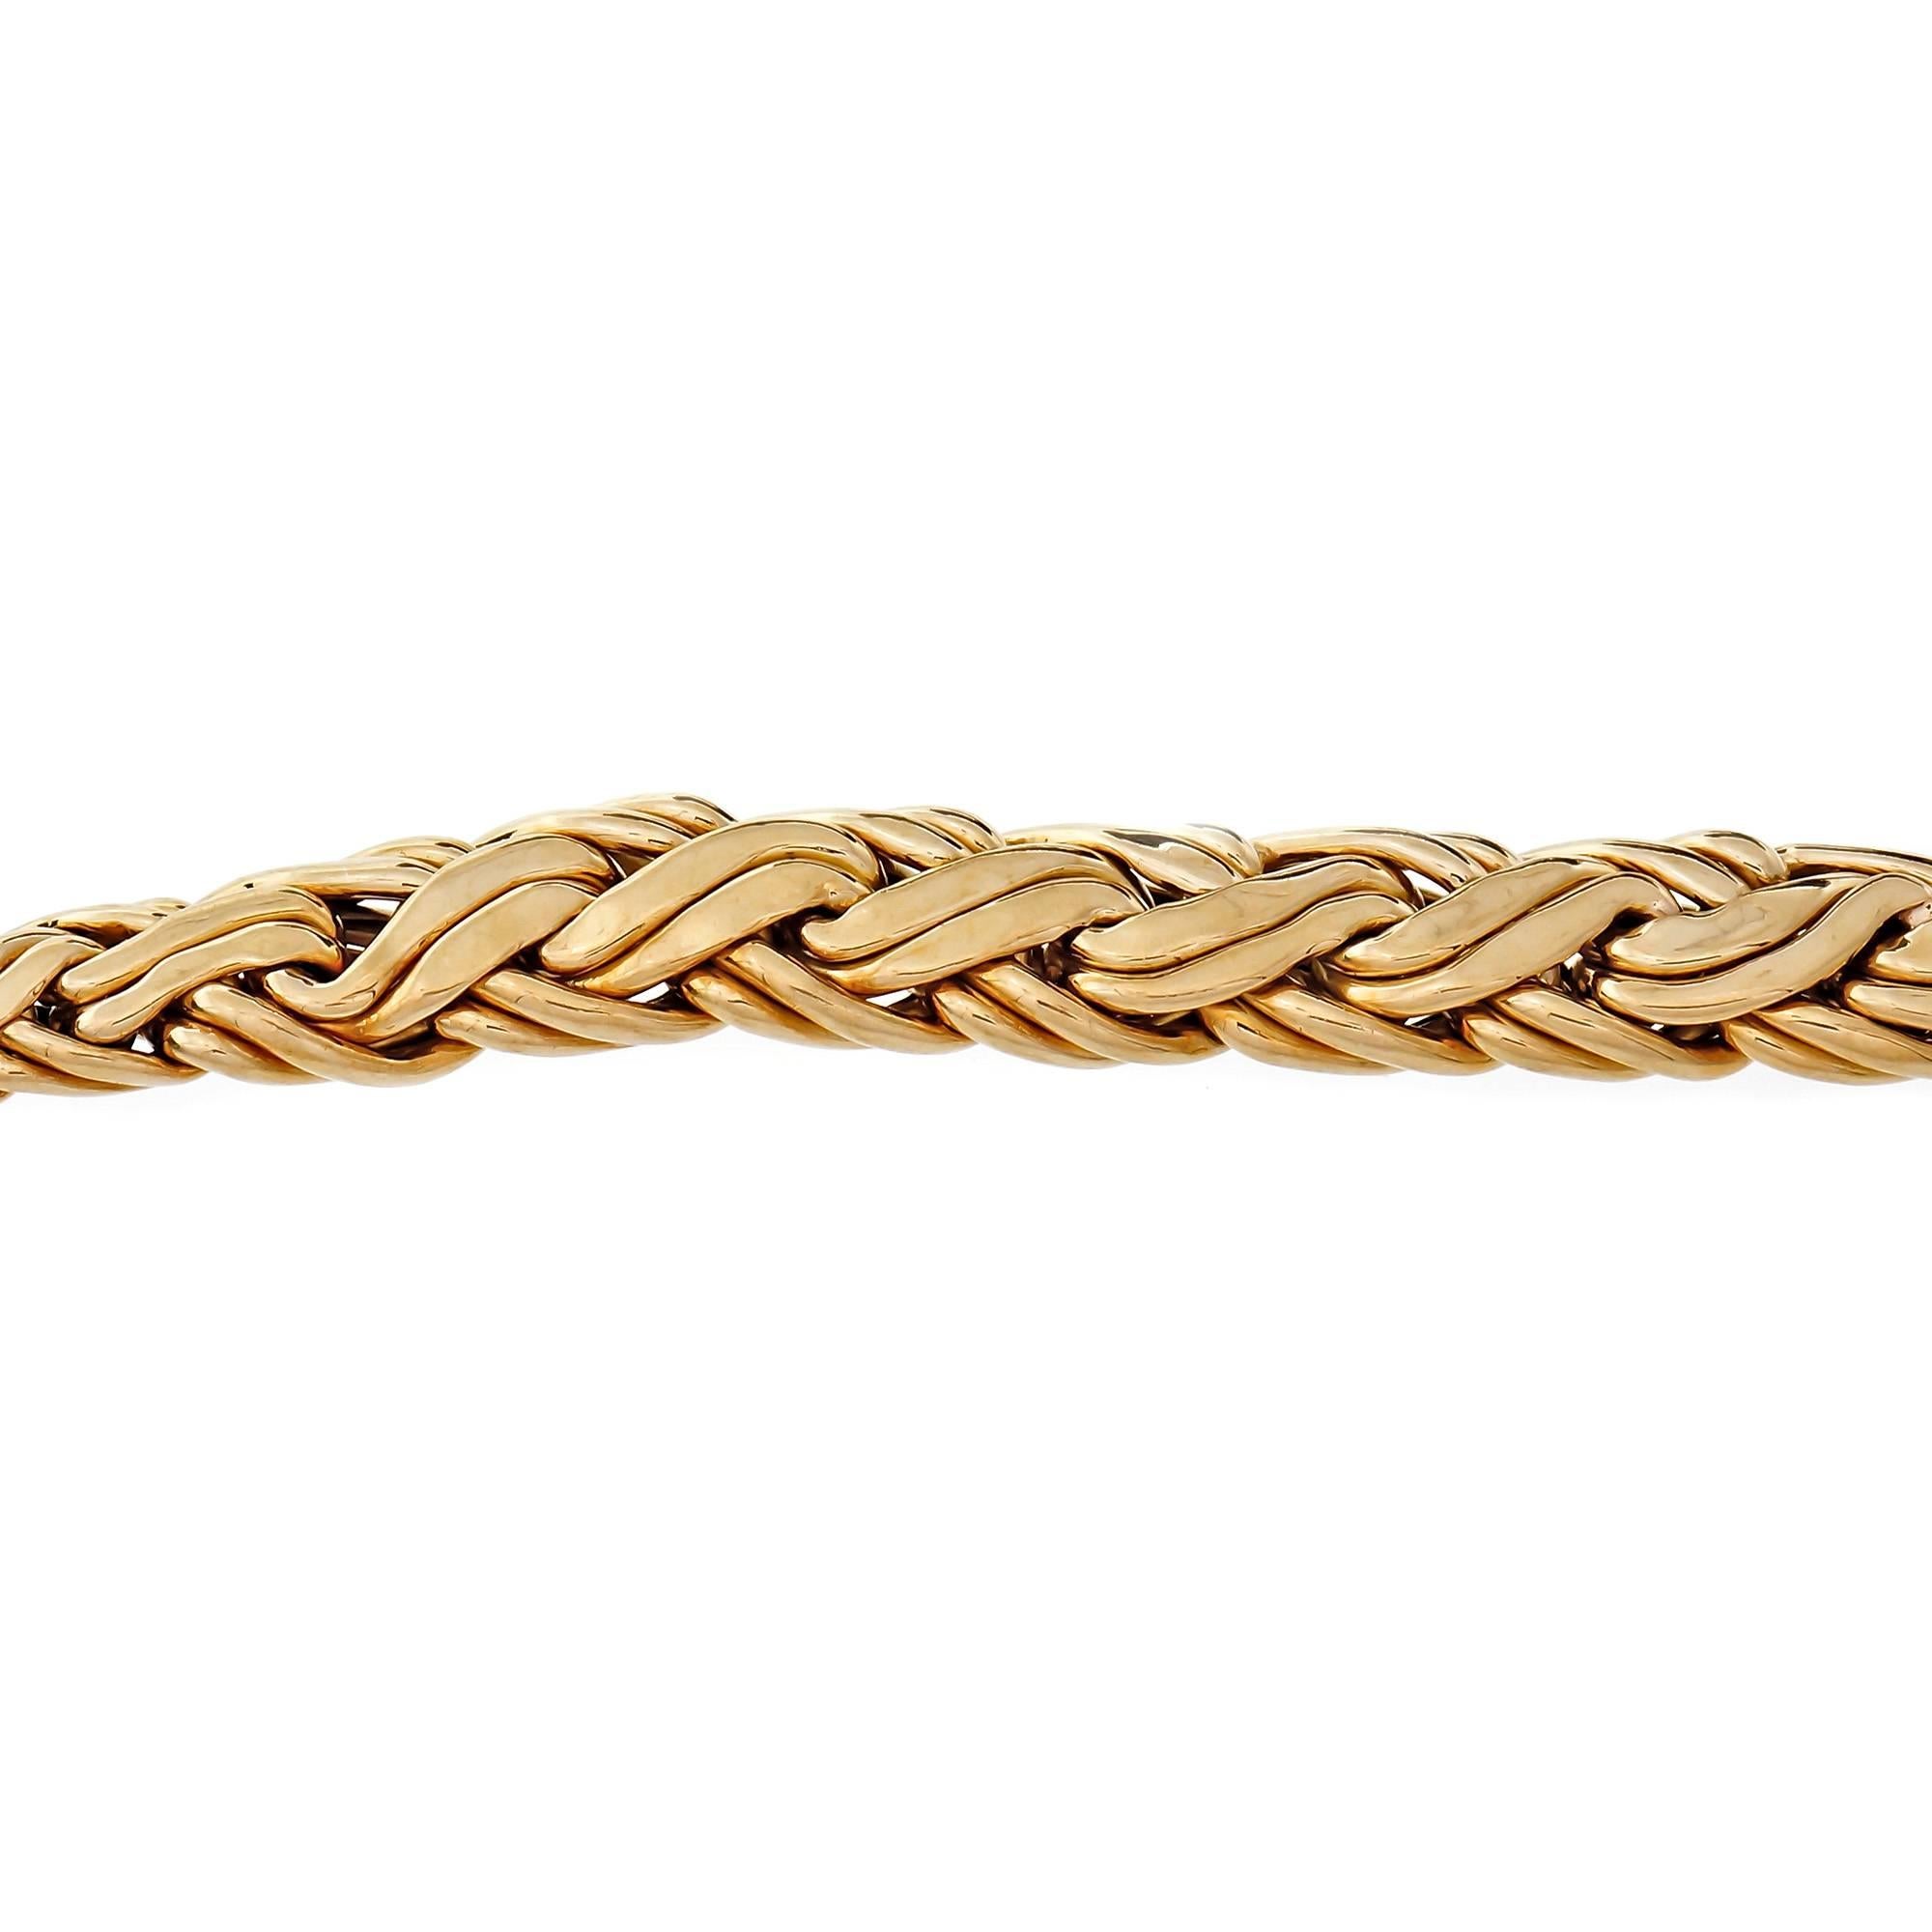 Tiffany & Co woven graduated 18k yellow gold. 16-inch link necklace.

18k yellow gold
Tested: 18k
Stamped: 750
38.7 grams
Length: 16 inches – Width: 9.25mm – Depth: 5.05mm
